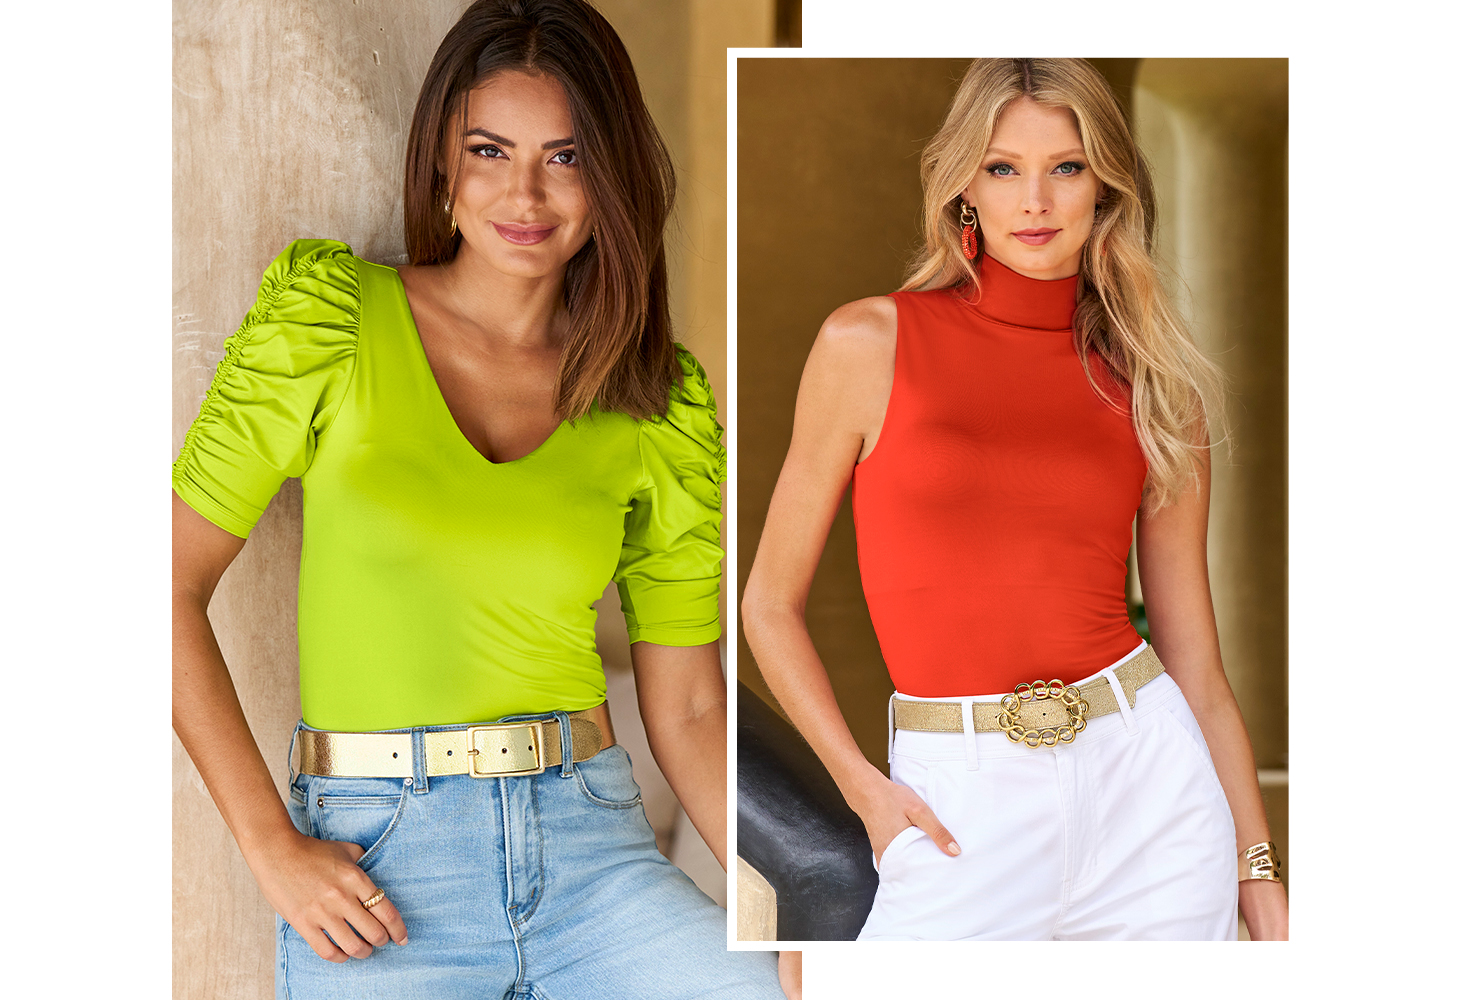 Models wearing green ruched sleeved top, gold metallic belt and light wash jeans. Models wearing sleeveless red turtleneck, metallic gold buckle belt and white pants.